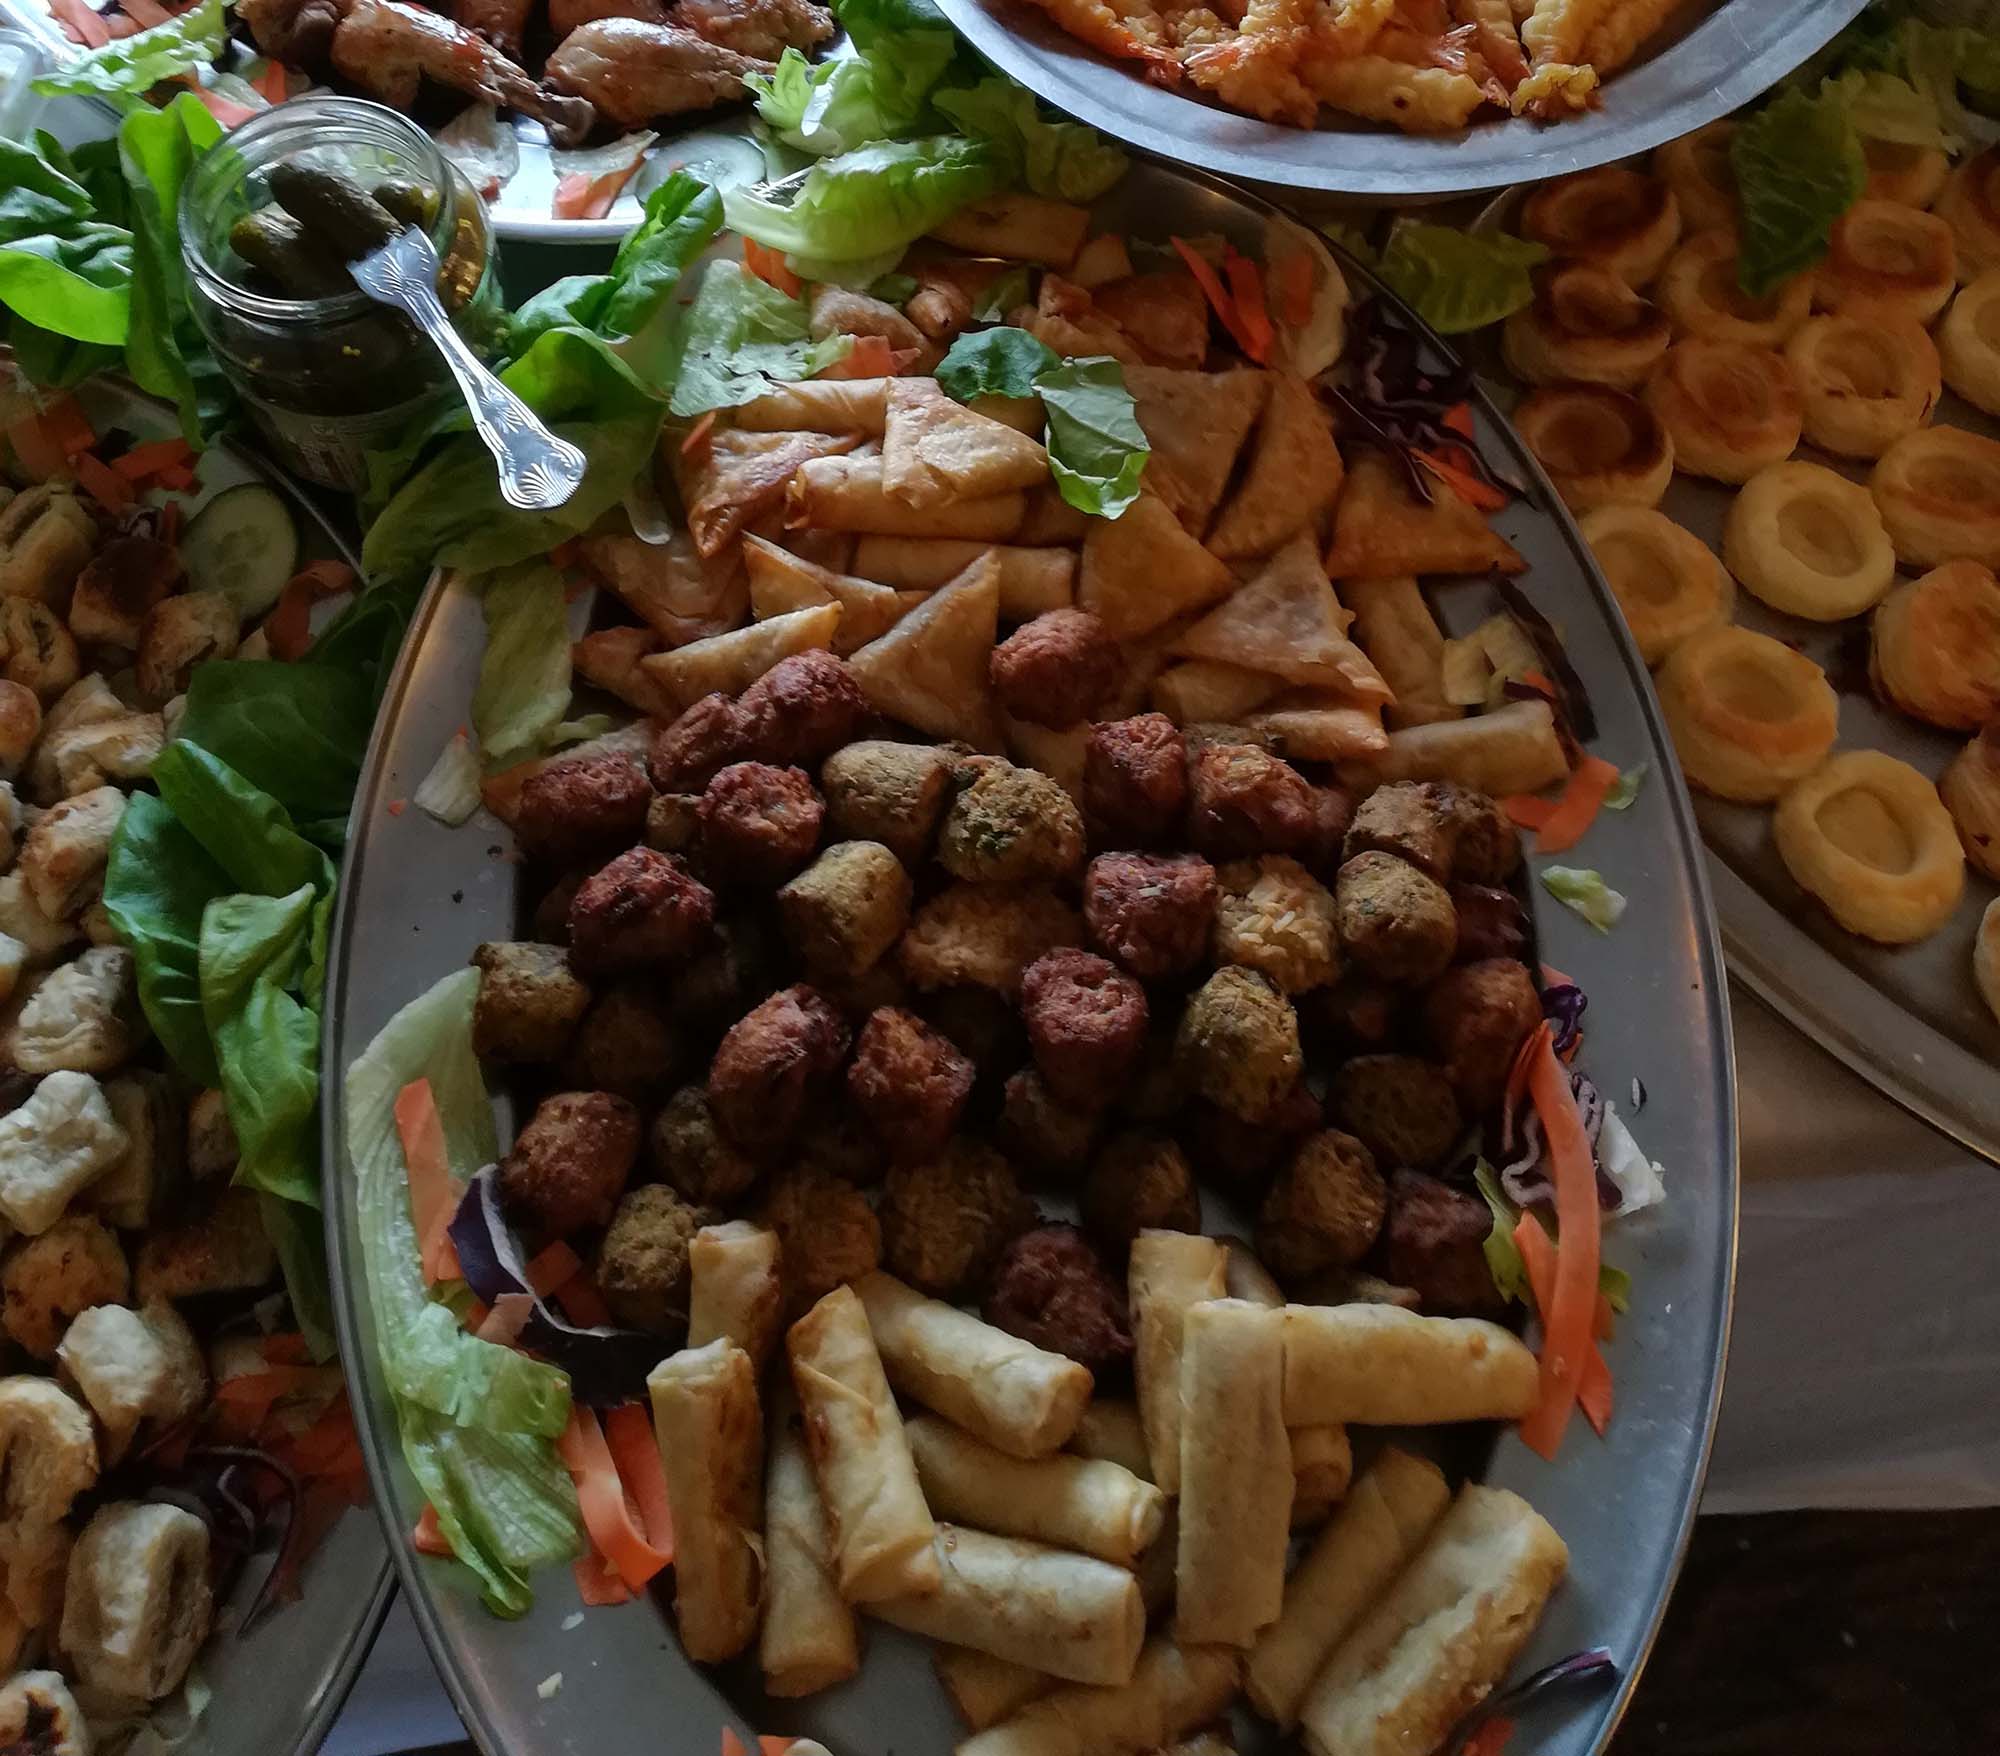 selection of meatballs and samosas for a catering event